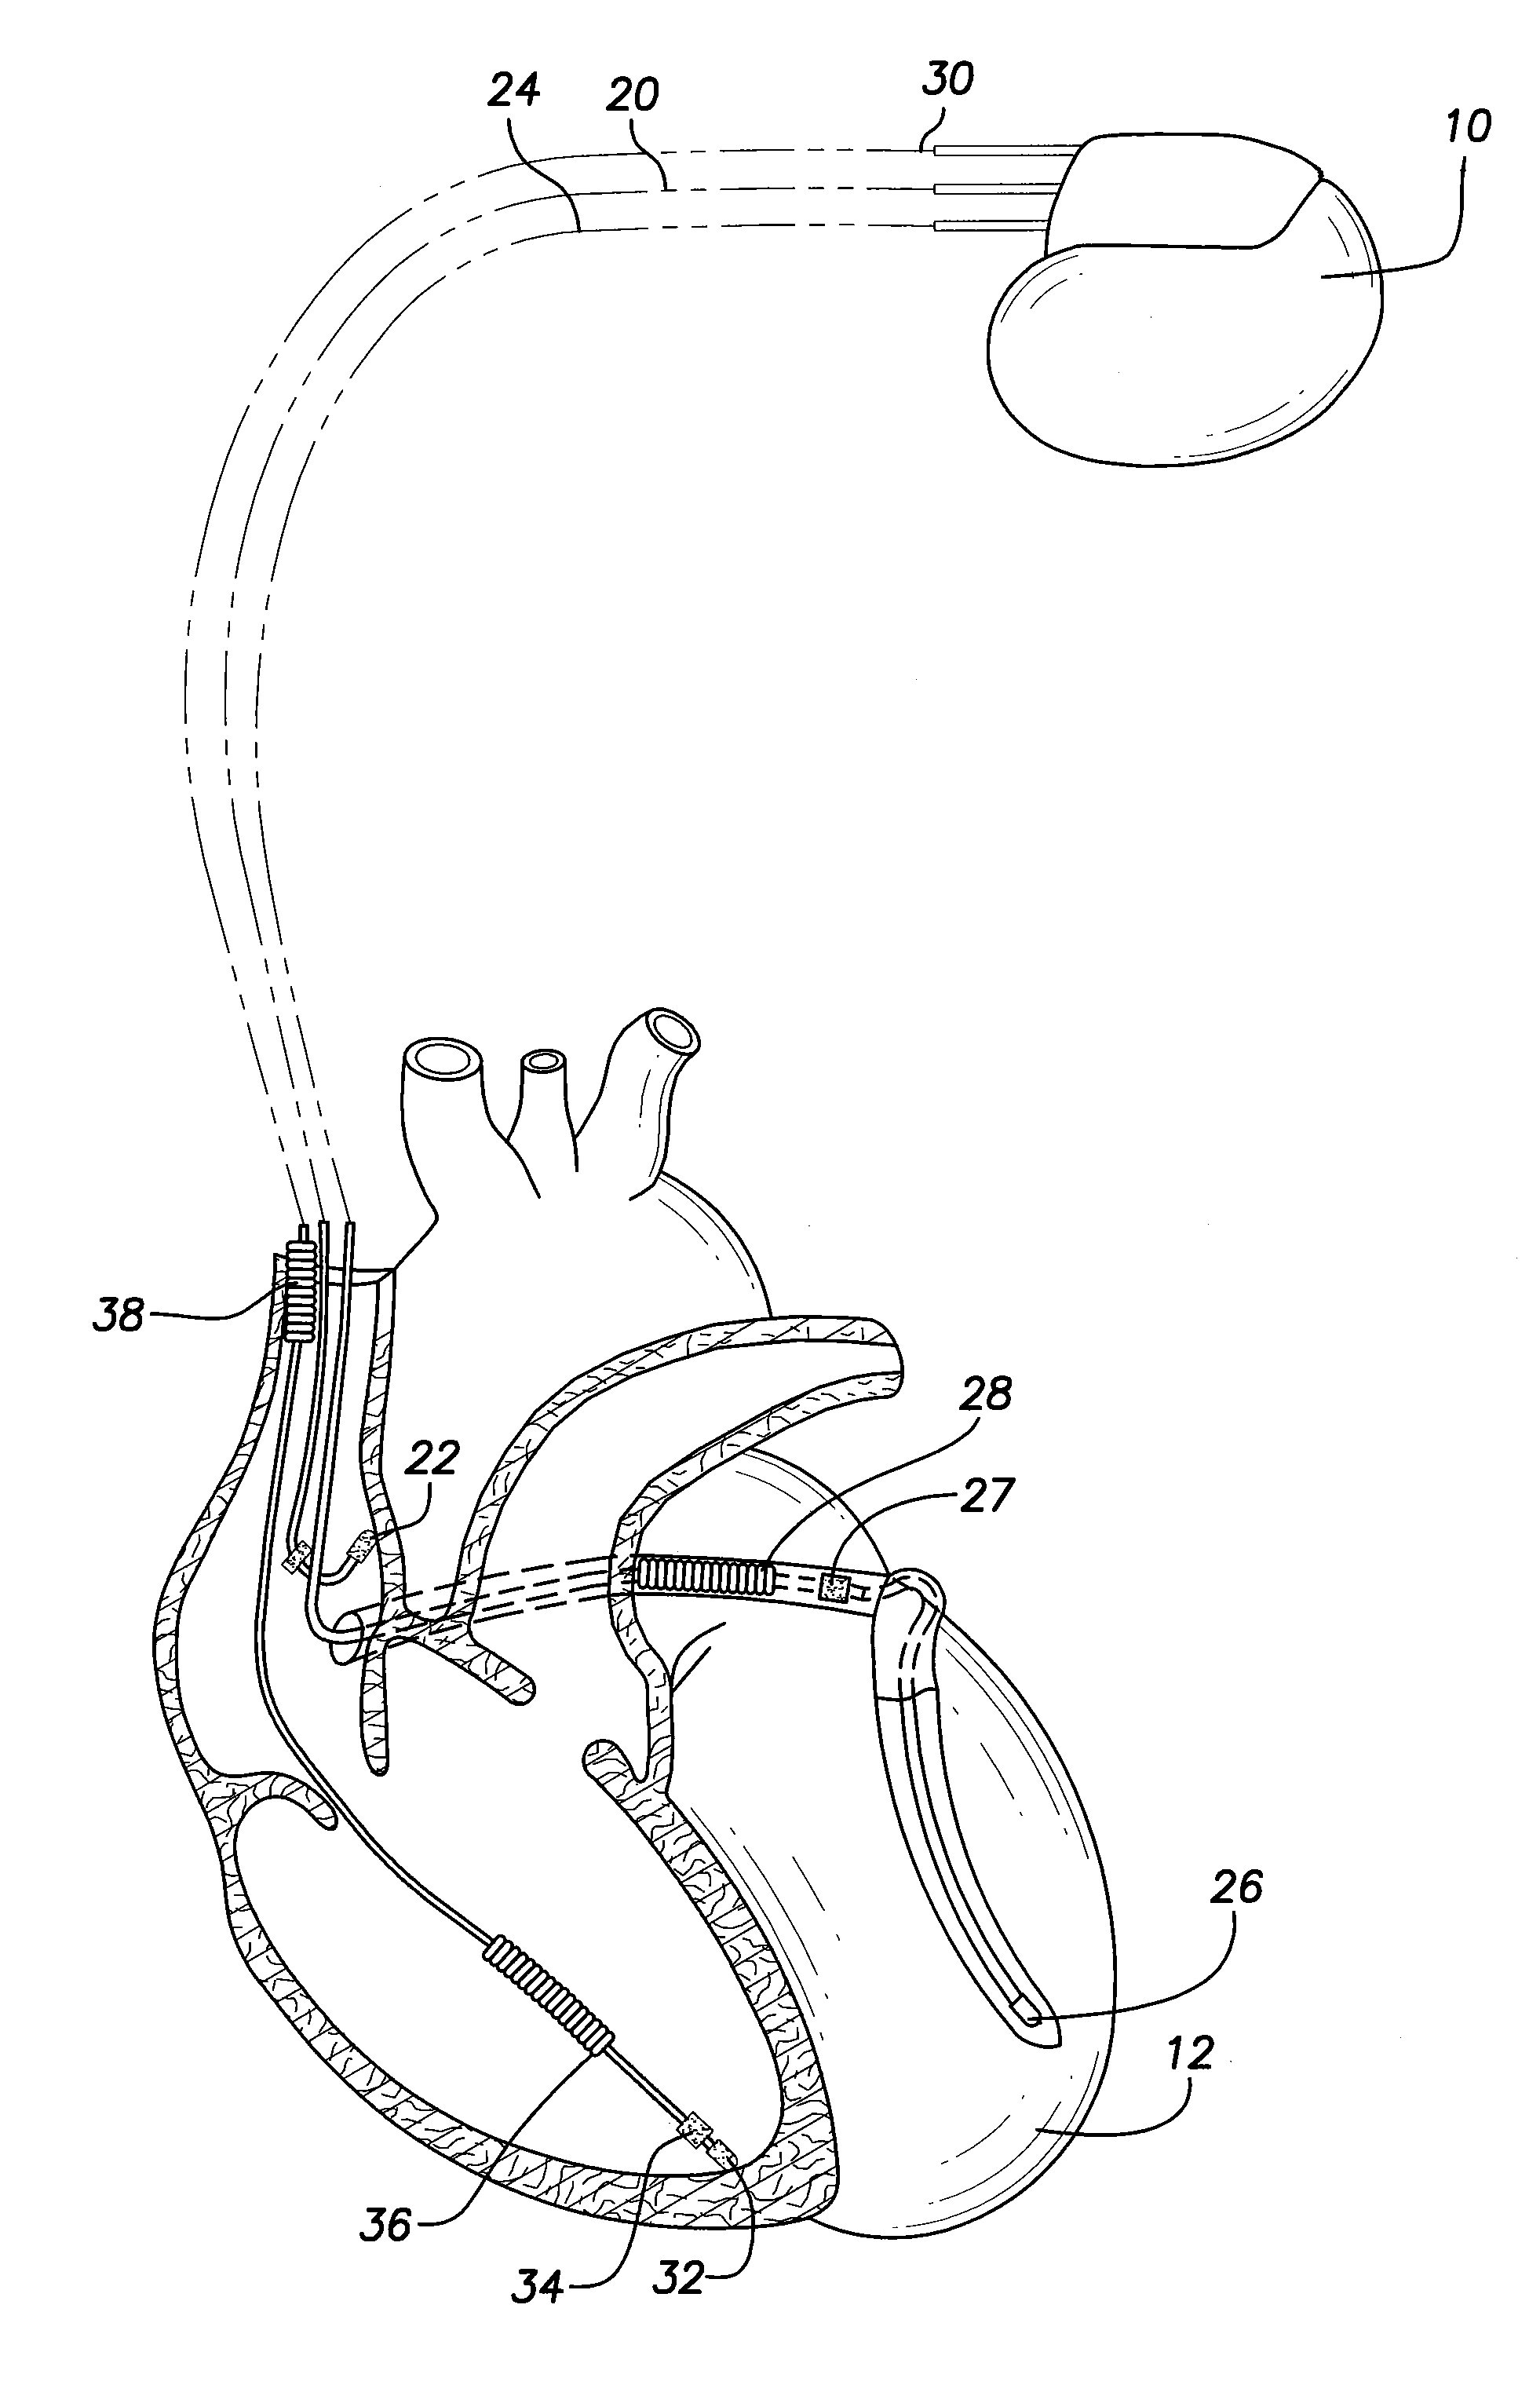 Method and system for detecting and treating junctional rhythms